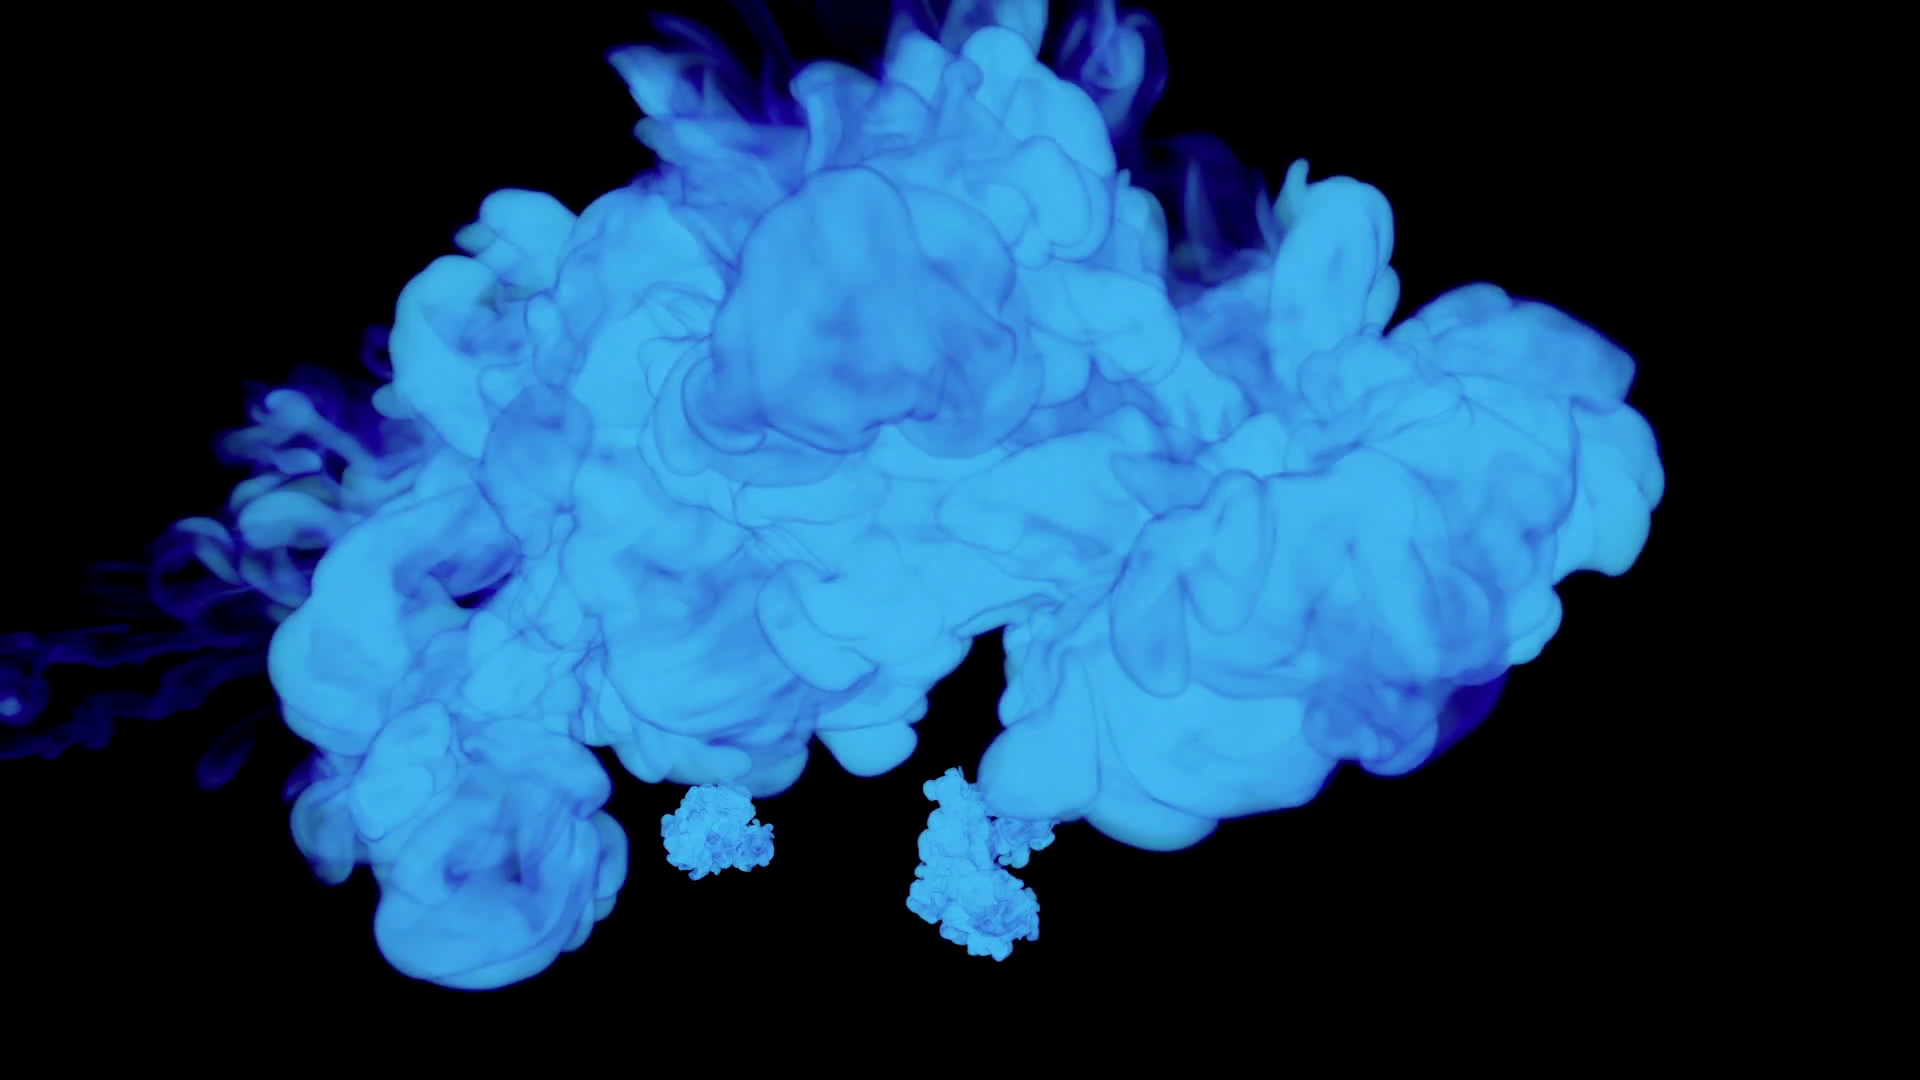 ABSTRACT BACKGROUND. BLUE SMOKE or BLUE INK IN WATER SERIES ON BLACK ...